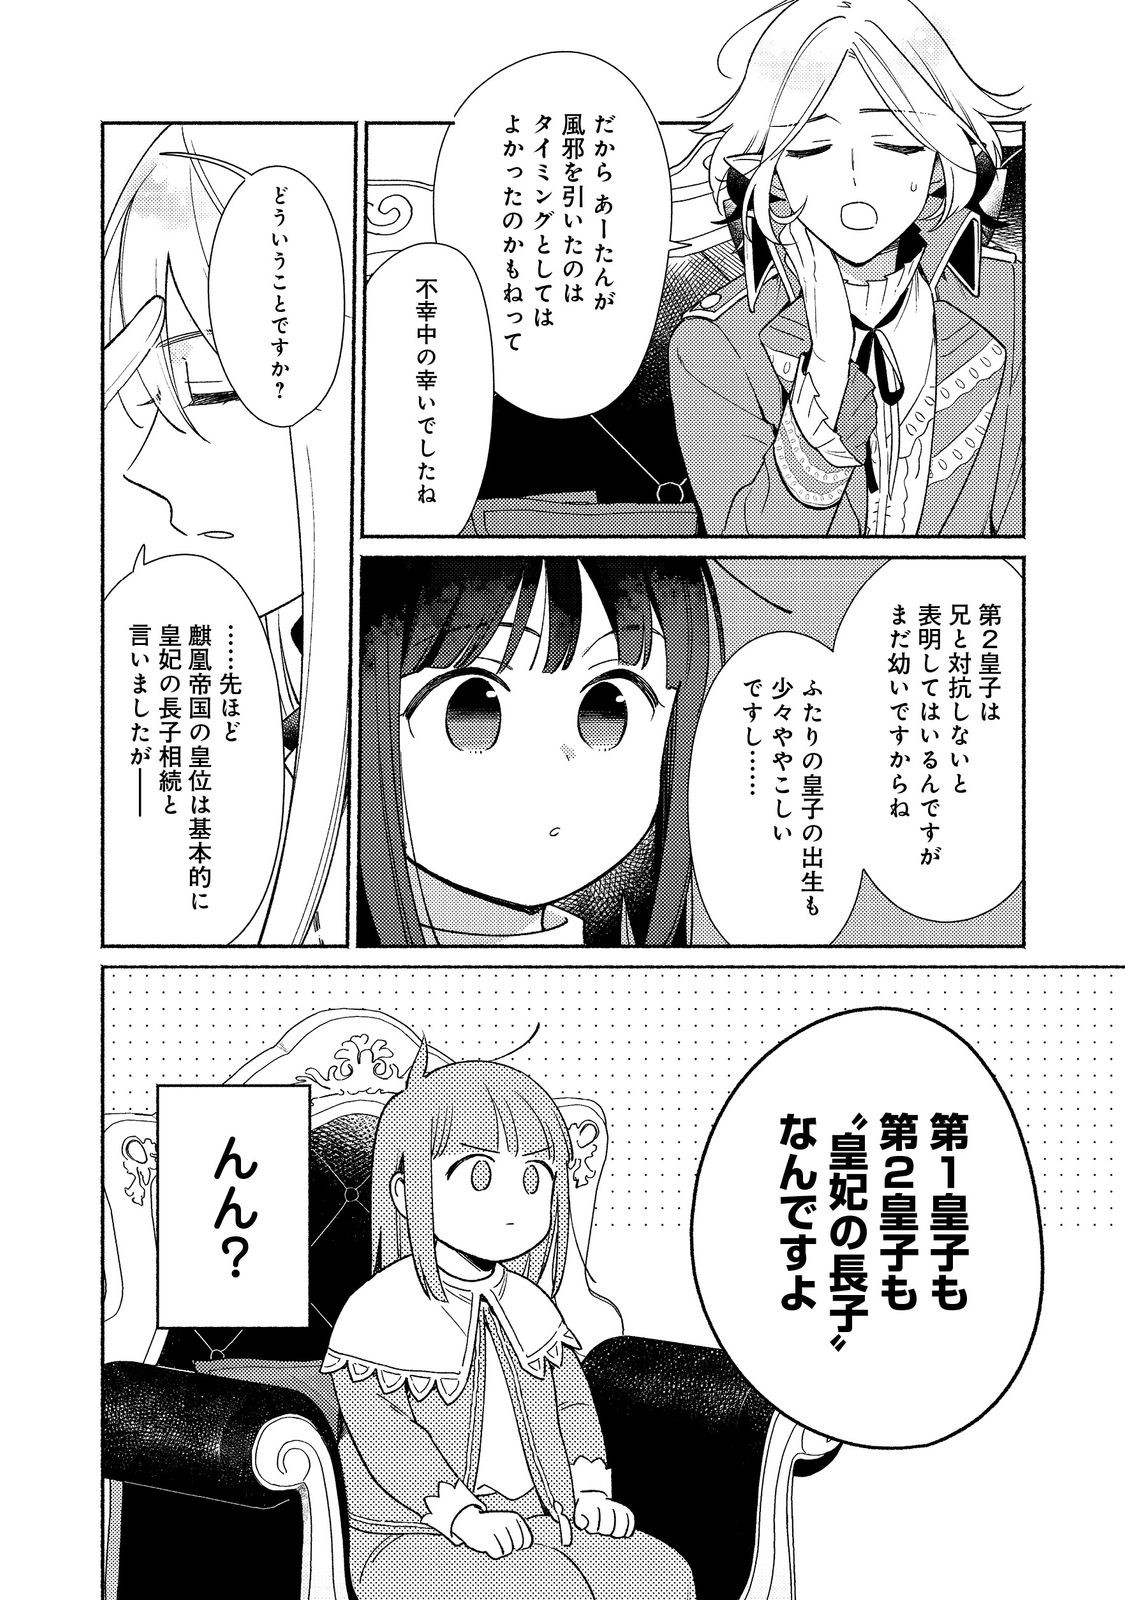 I’m the White Pig Nobleman 第23.1話 - Page 4